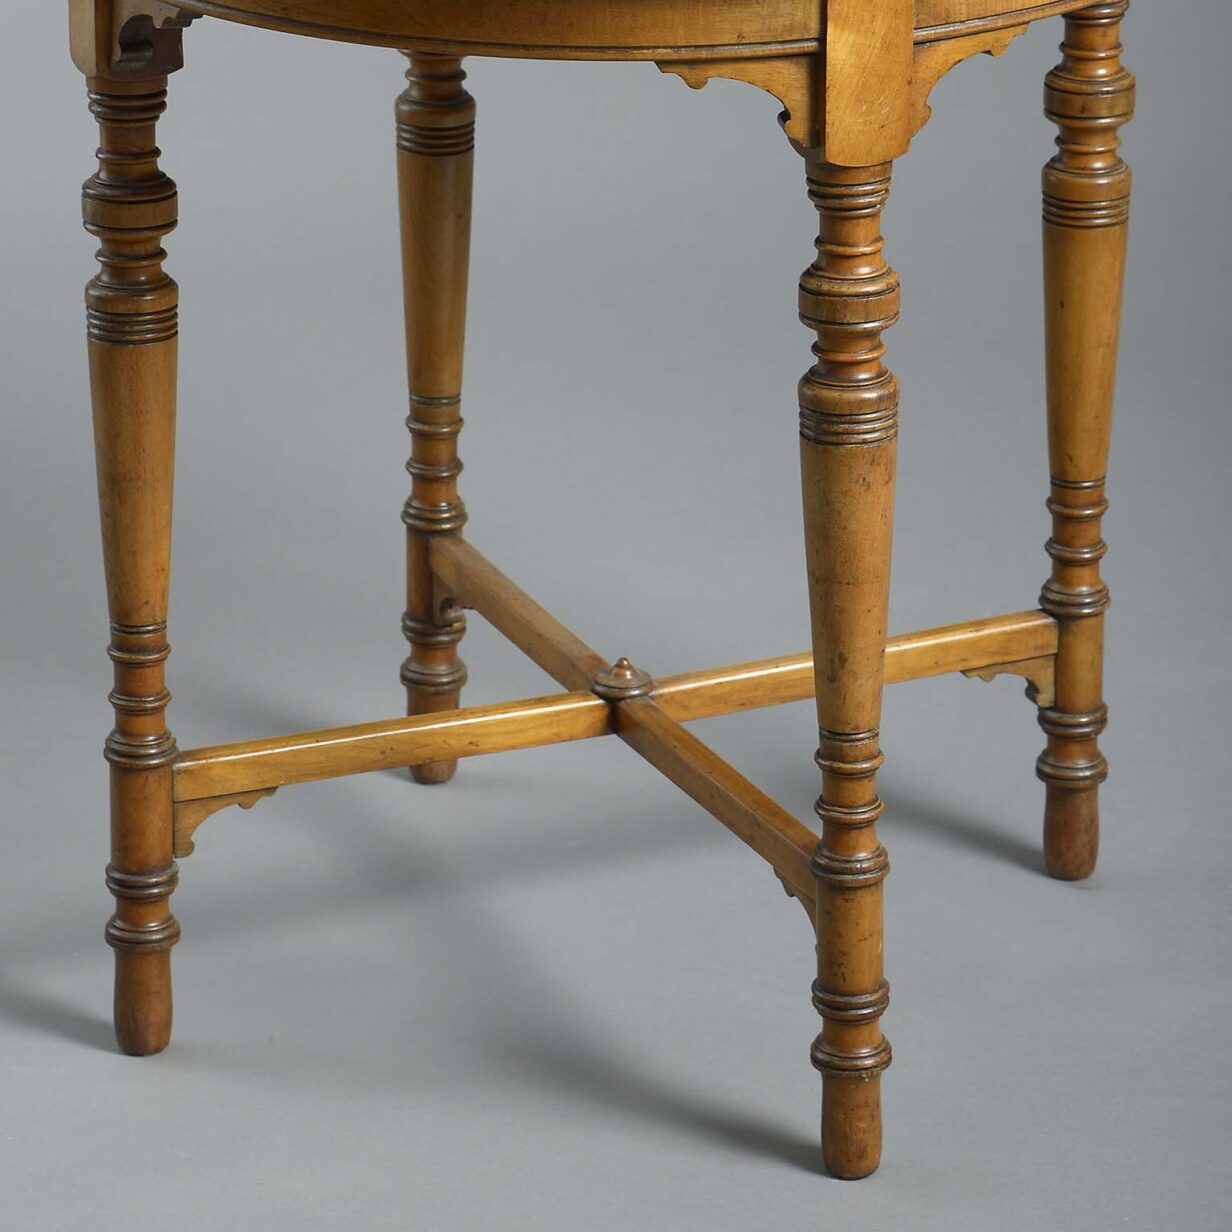 Late 19th century specimen wood table attributed to william norries